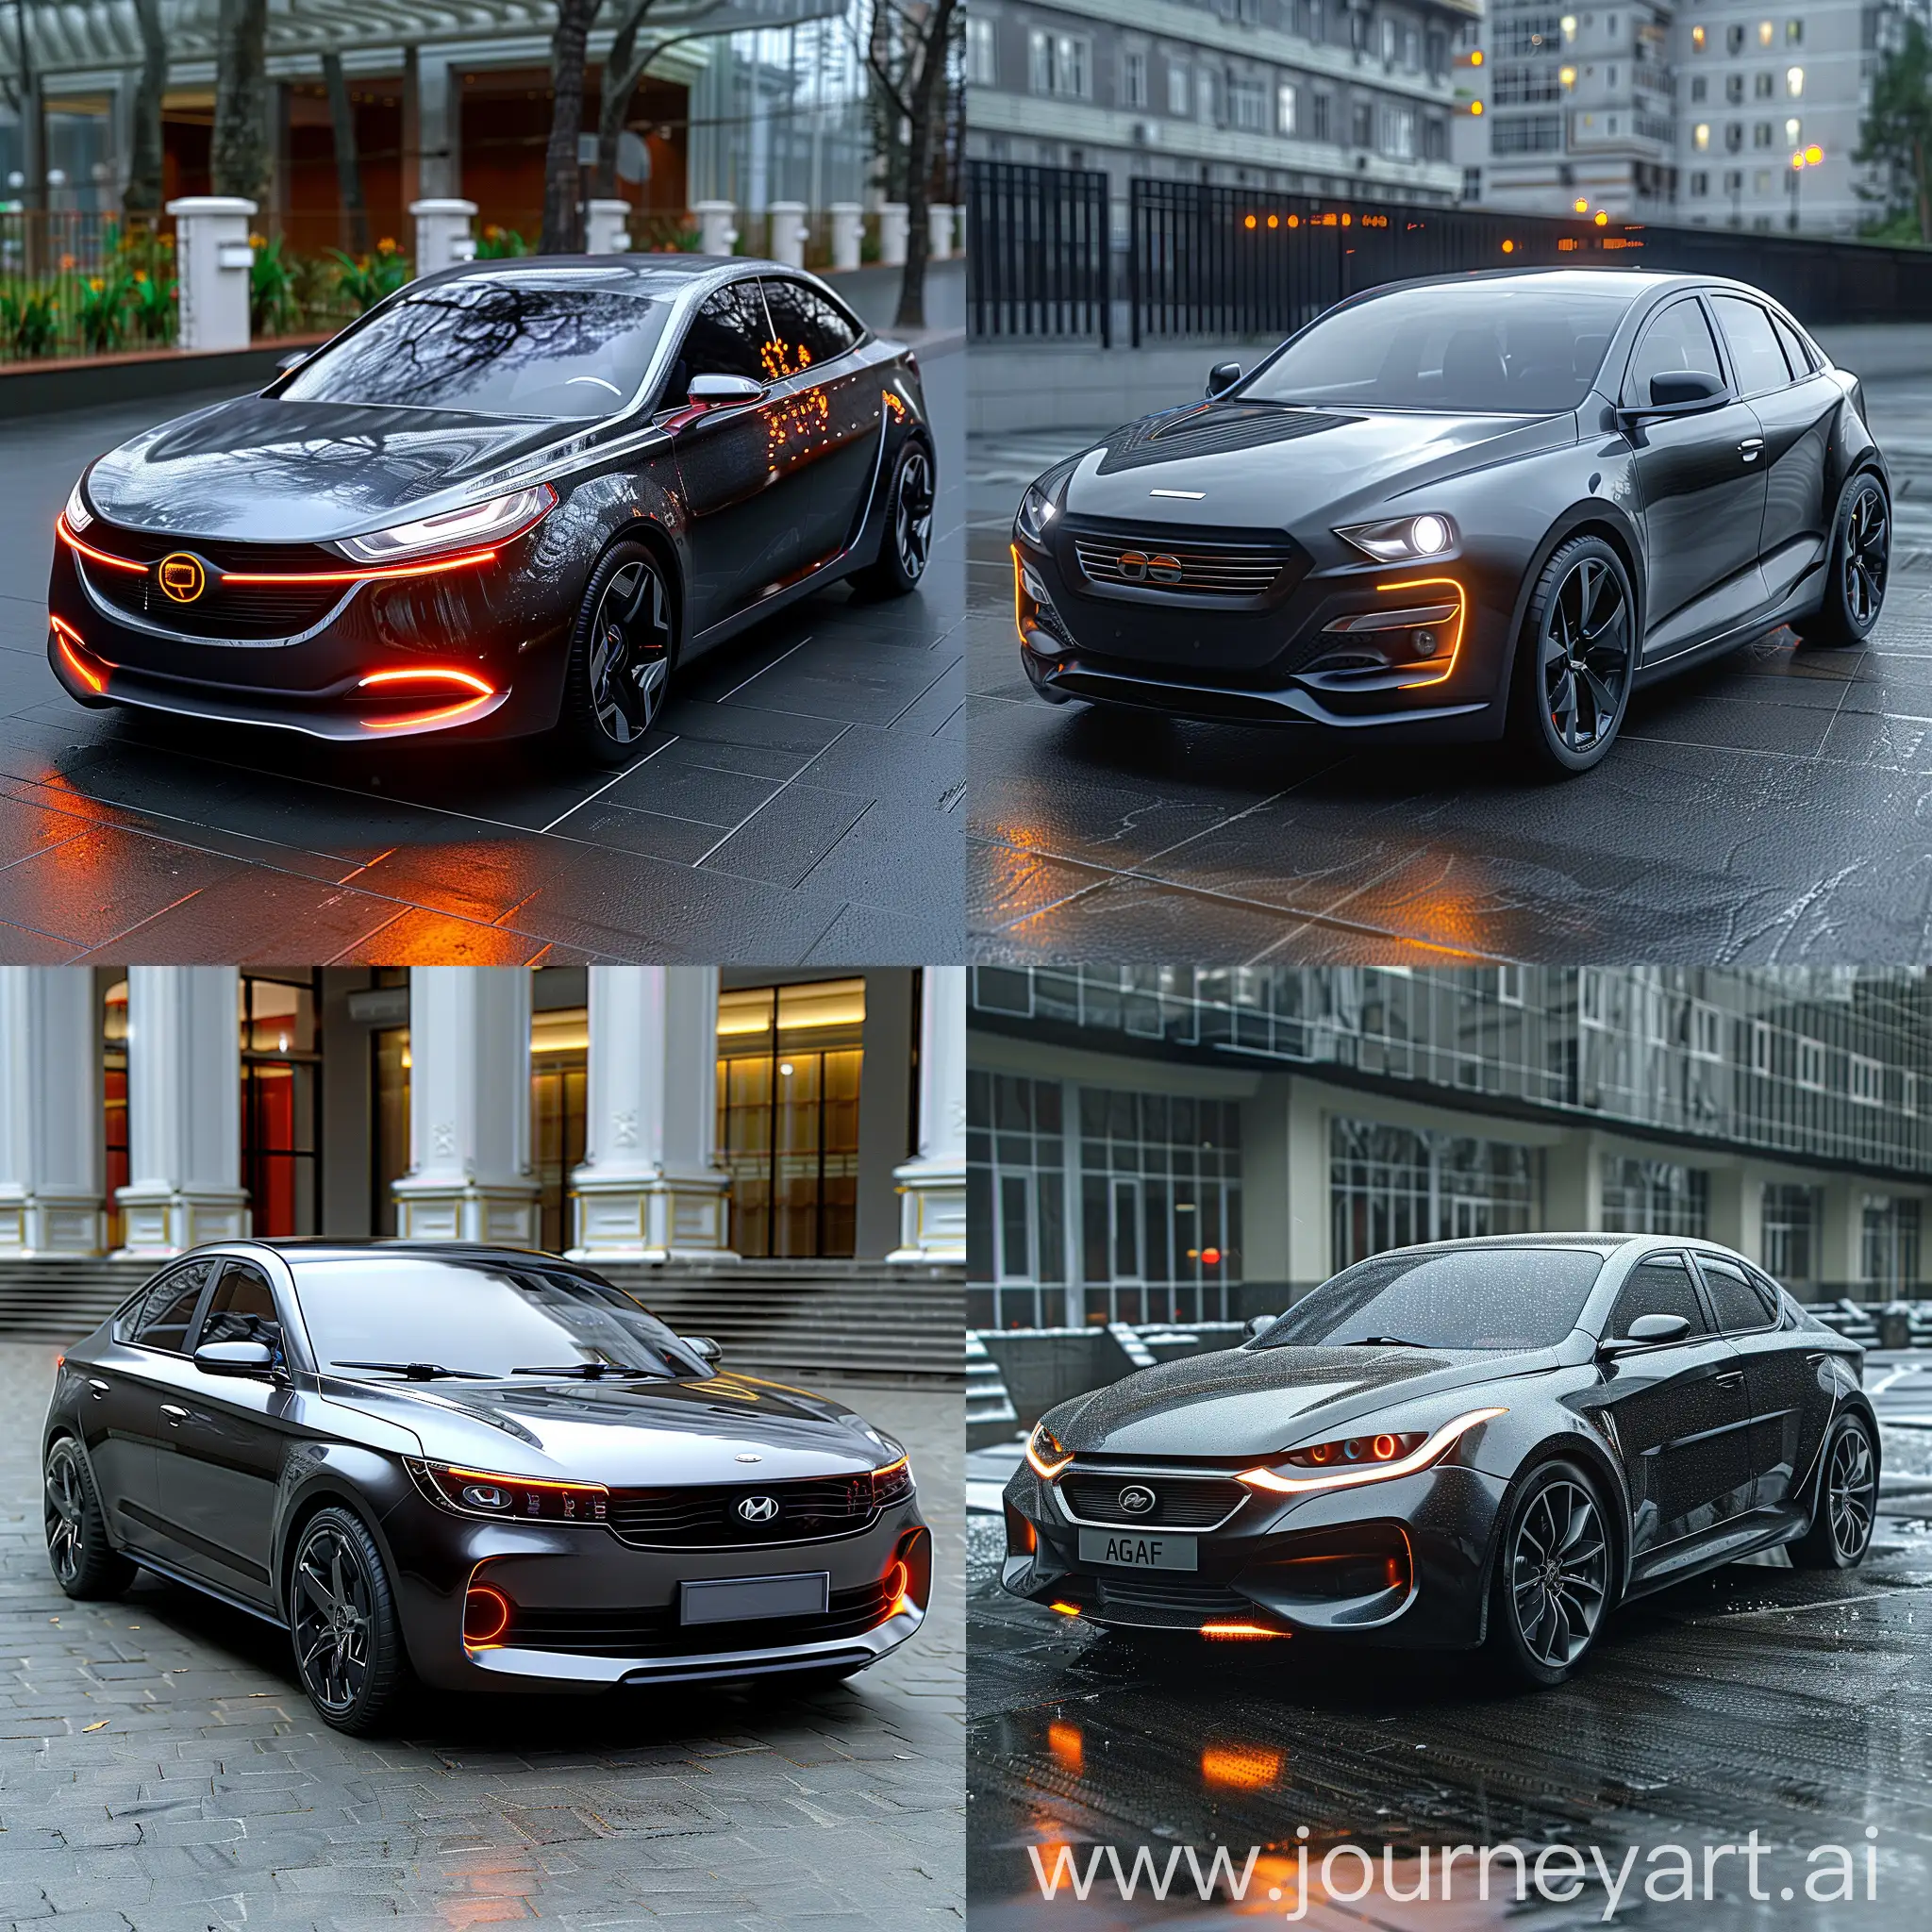 Futuristic LADA Vesta https://upload.wikimedia.org/wikipedia/commons/thumb/8/85/Lada_Vesta_%28cropped%29.jpg/280px-Lada_Vesta_%28cropped%29.jpg:: Sleek and aerodynamic body, Advanced lighting technolog, Smart glass technology, Integrated biometric authentication, Augmented reality heads-up display, Self-healing body panels, Advanced autonomous driving capabilities, Intelligent connectivity, Environmentally-friendly materials, Holographic displays and controls, Premium materials, Attention to detail, Customizable interior, Comfort-focused seating, Noise insulation, Intuitive user interface, Premium audio system, Efficient lighting design, Dynamic exterior styling, Advanced safety features, octane render --stylize 1000